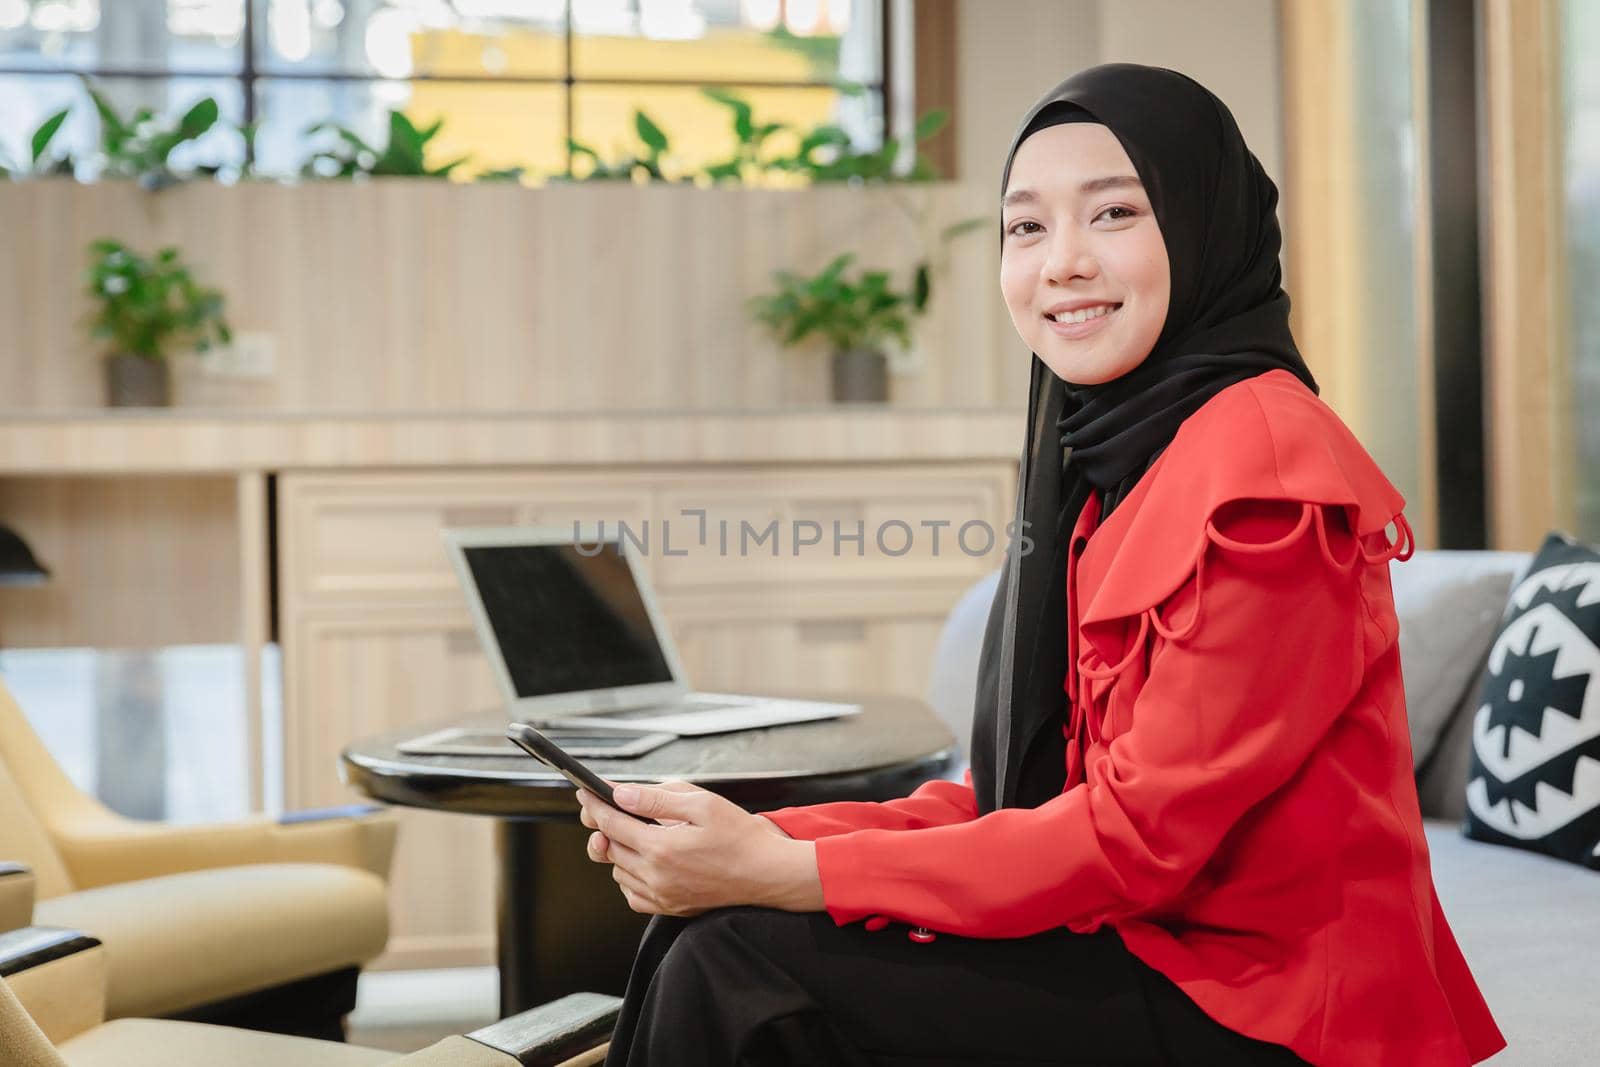 Arab Muslim businesswoman girl smiling sitting portrait in business office,Islam working woman concept by qualitystocks